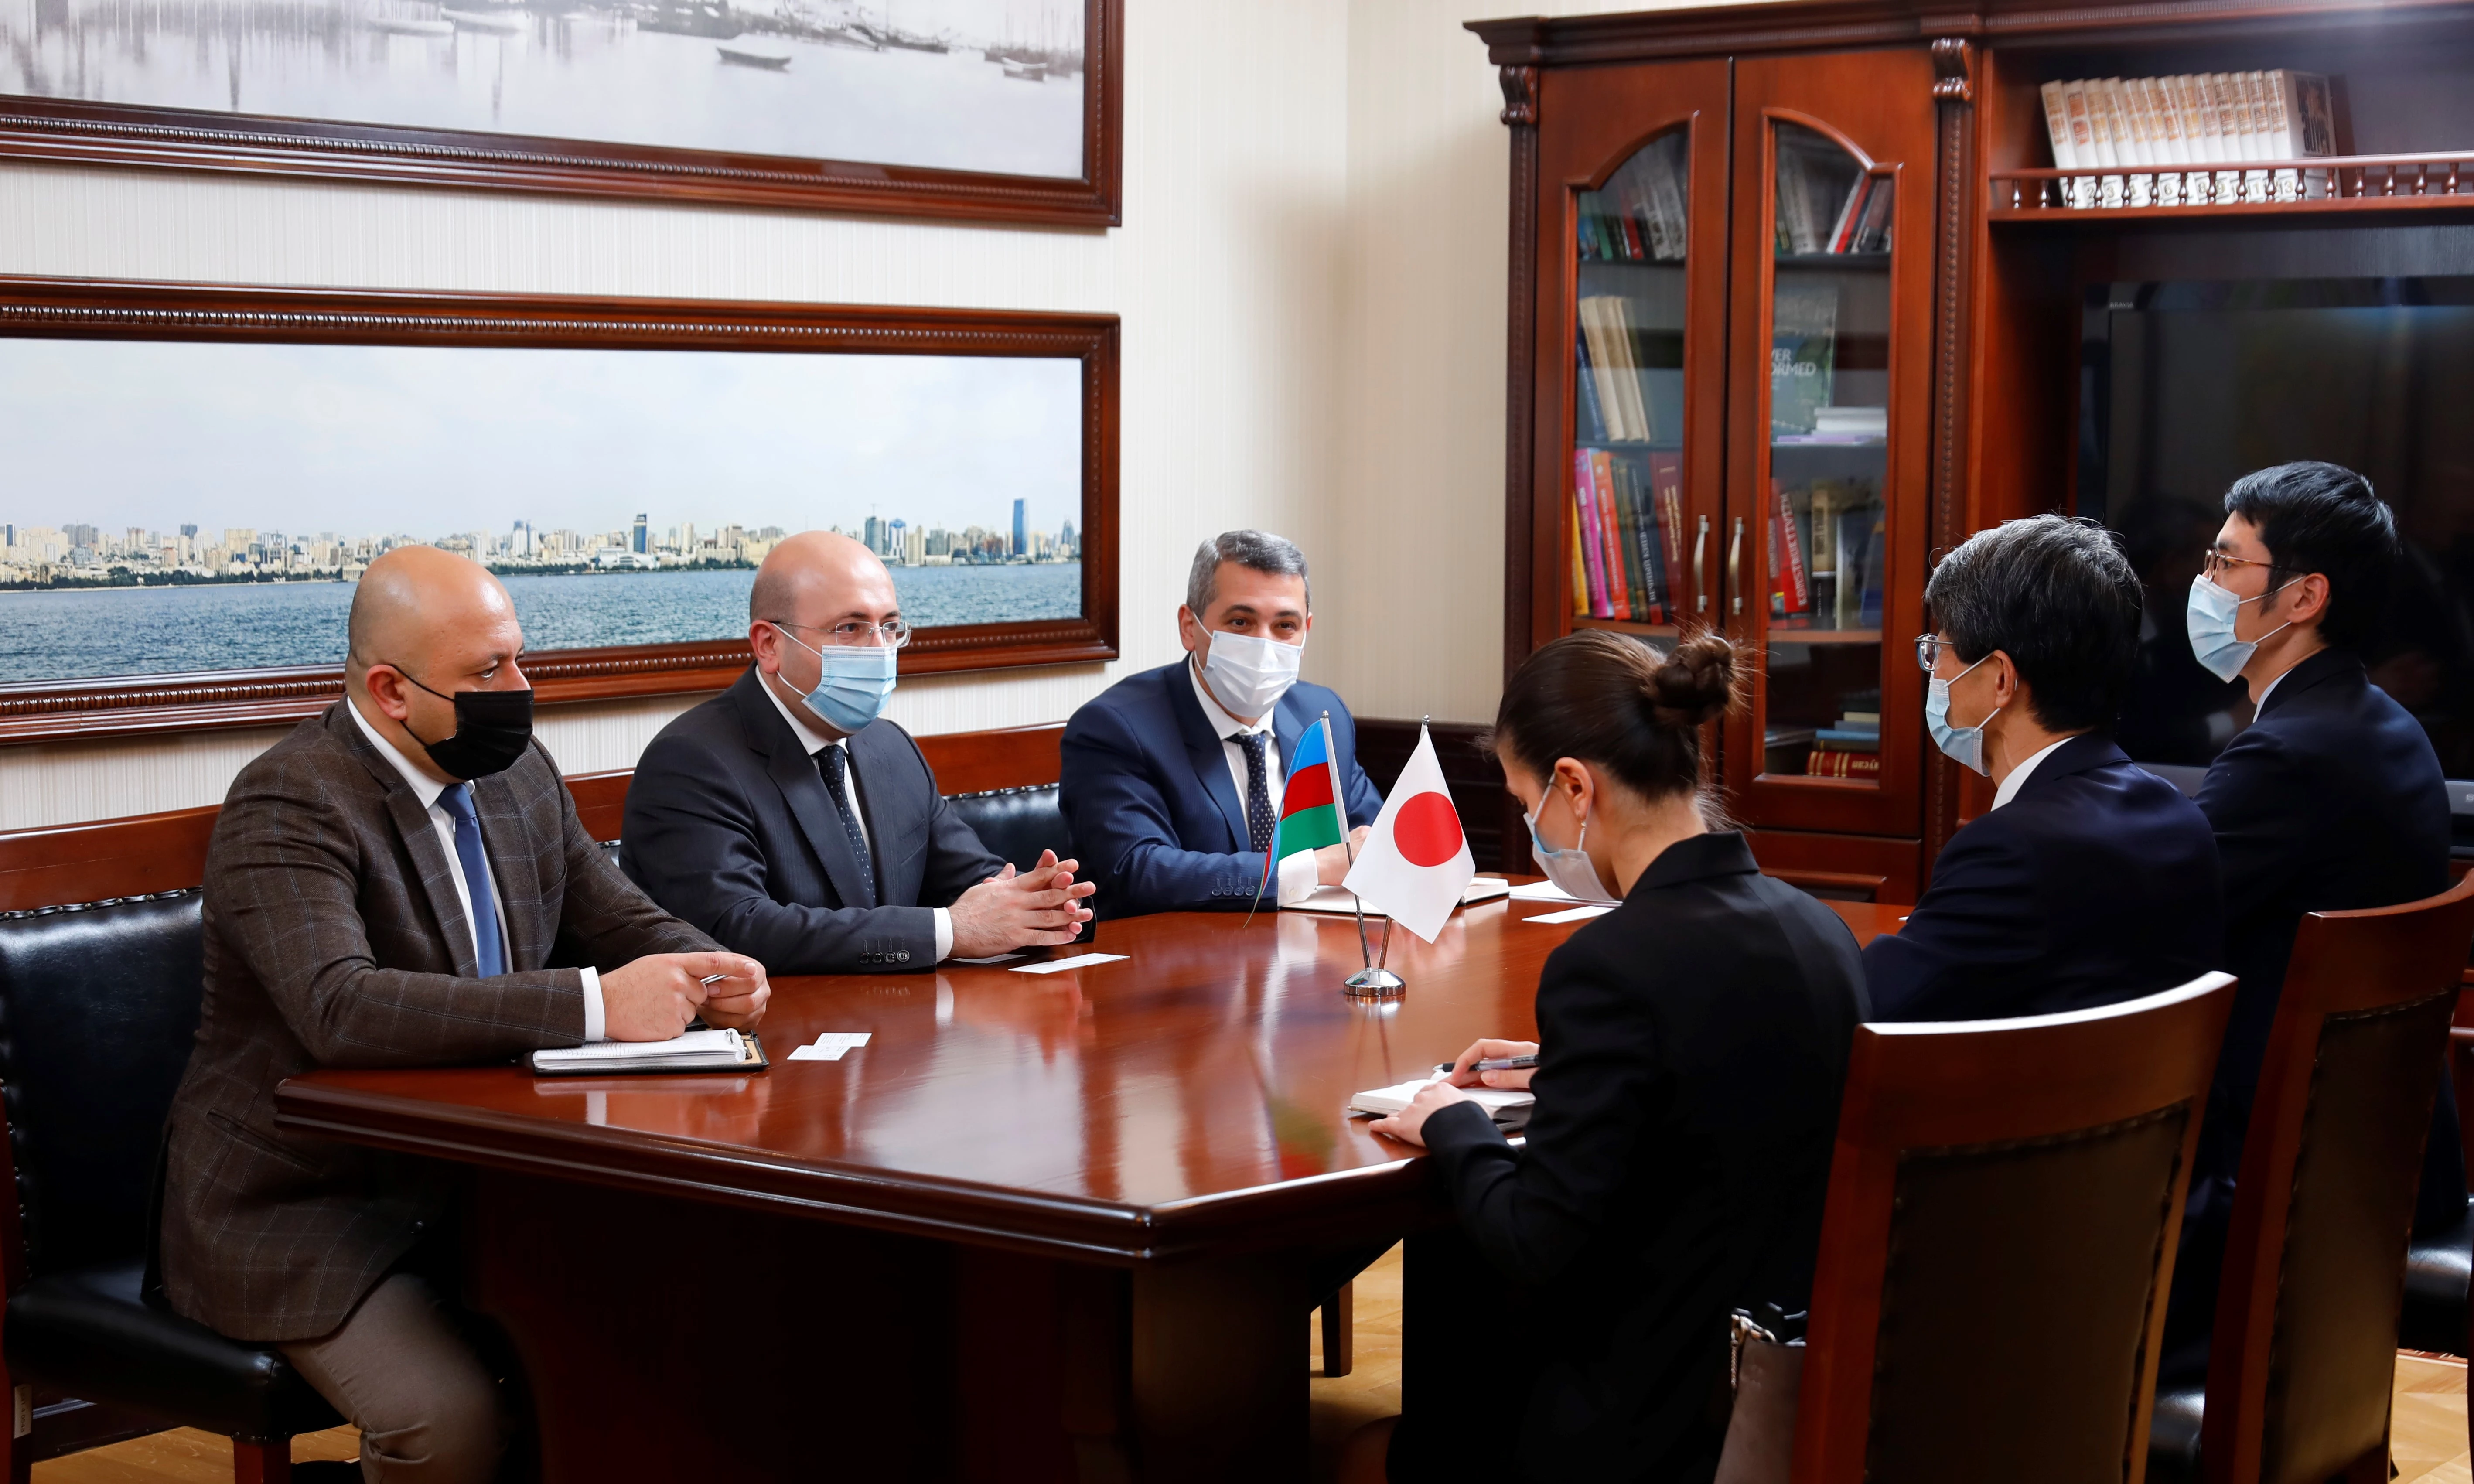 The chairman of the State Committee for Urban Planning and Architecture received the Japanese ambassador to Azerbaijan